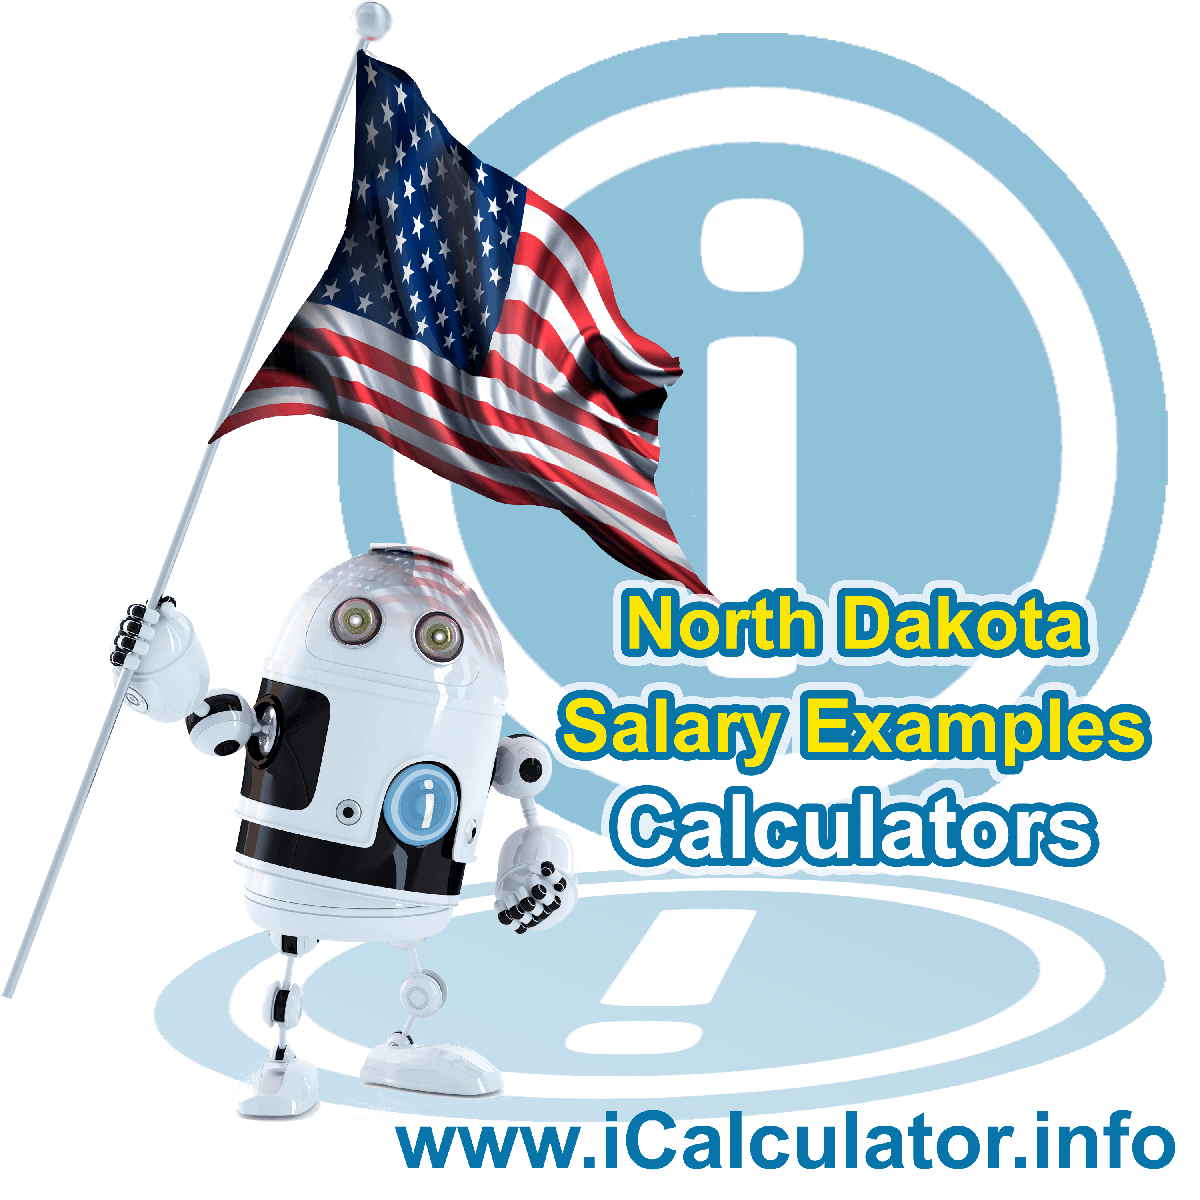 North Dakota Salary Example for $ 220,000.00 in 2023 | iCalculator™ | $ 220,000.00 salary example for employee and employer paying North Dakota State tincome taxes. Detailed salary after tax calculation including North Dakota State Tax, Federal State Tax, Medicare Deductions, Social Security, Capital Gains and other income tax and salary deductions complete with supporting North Dakota state tax tables 